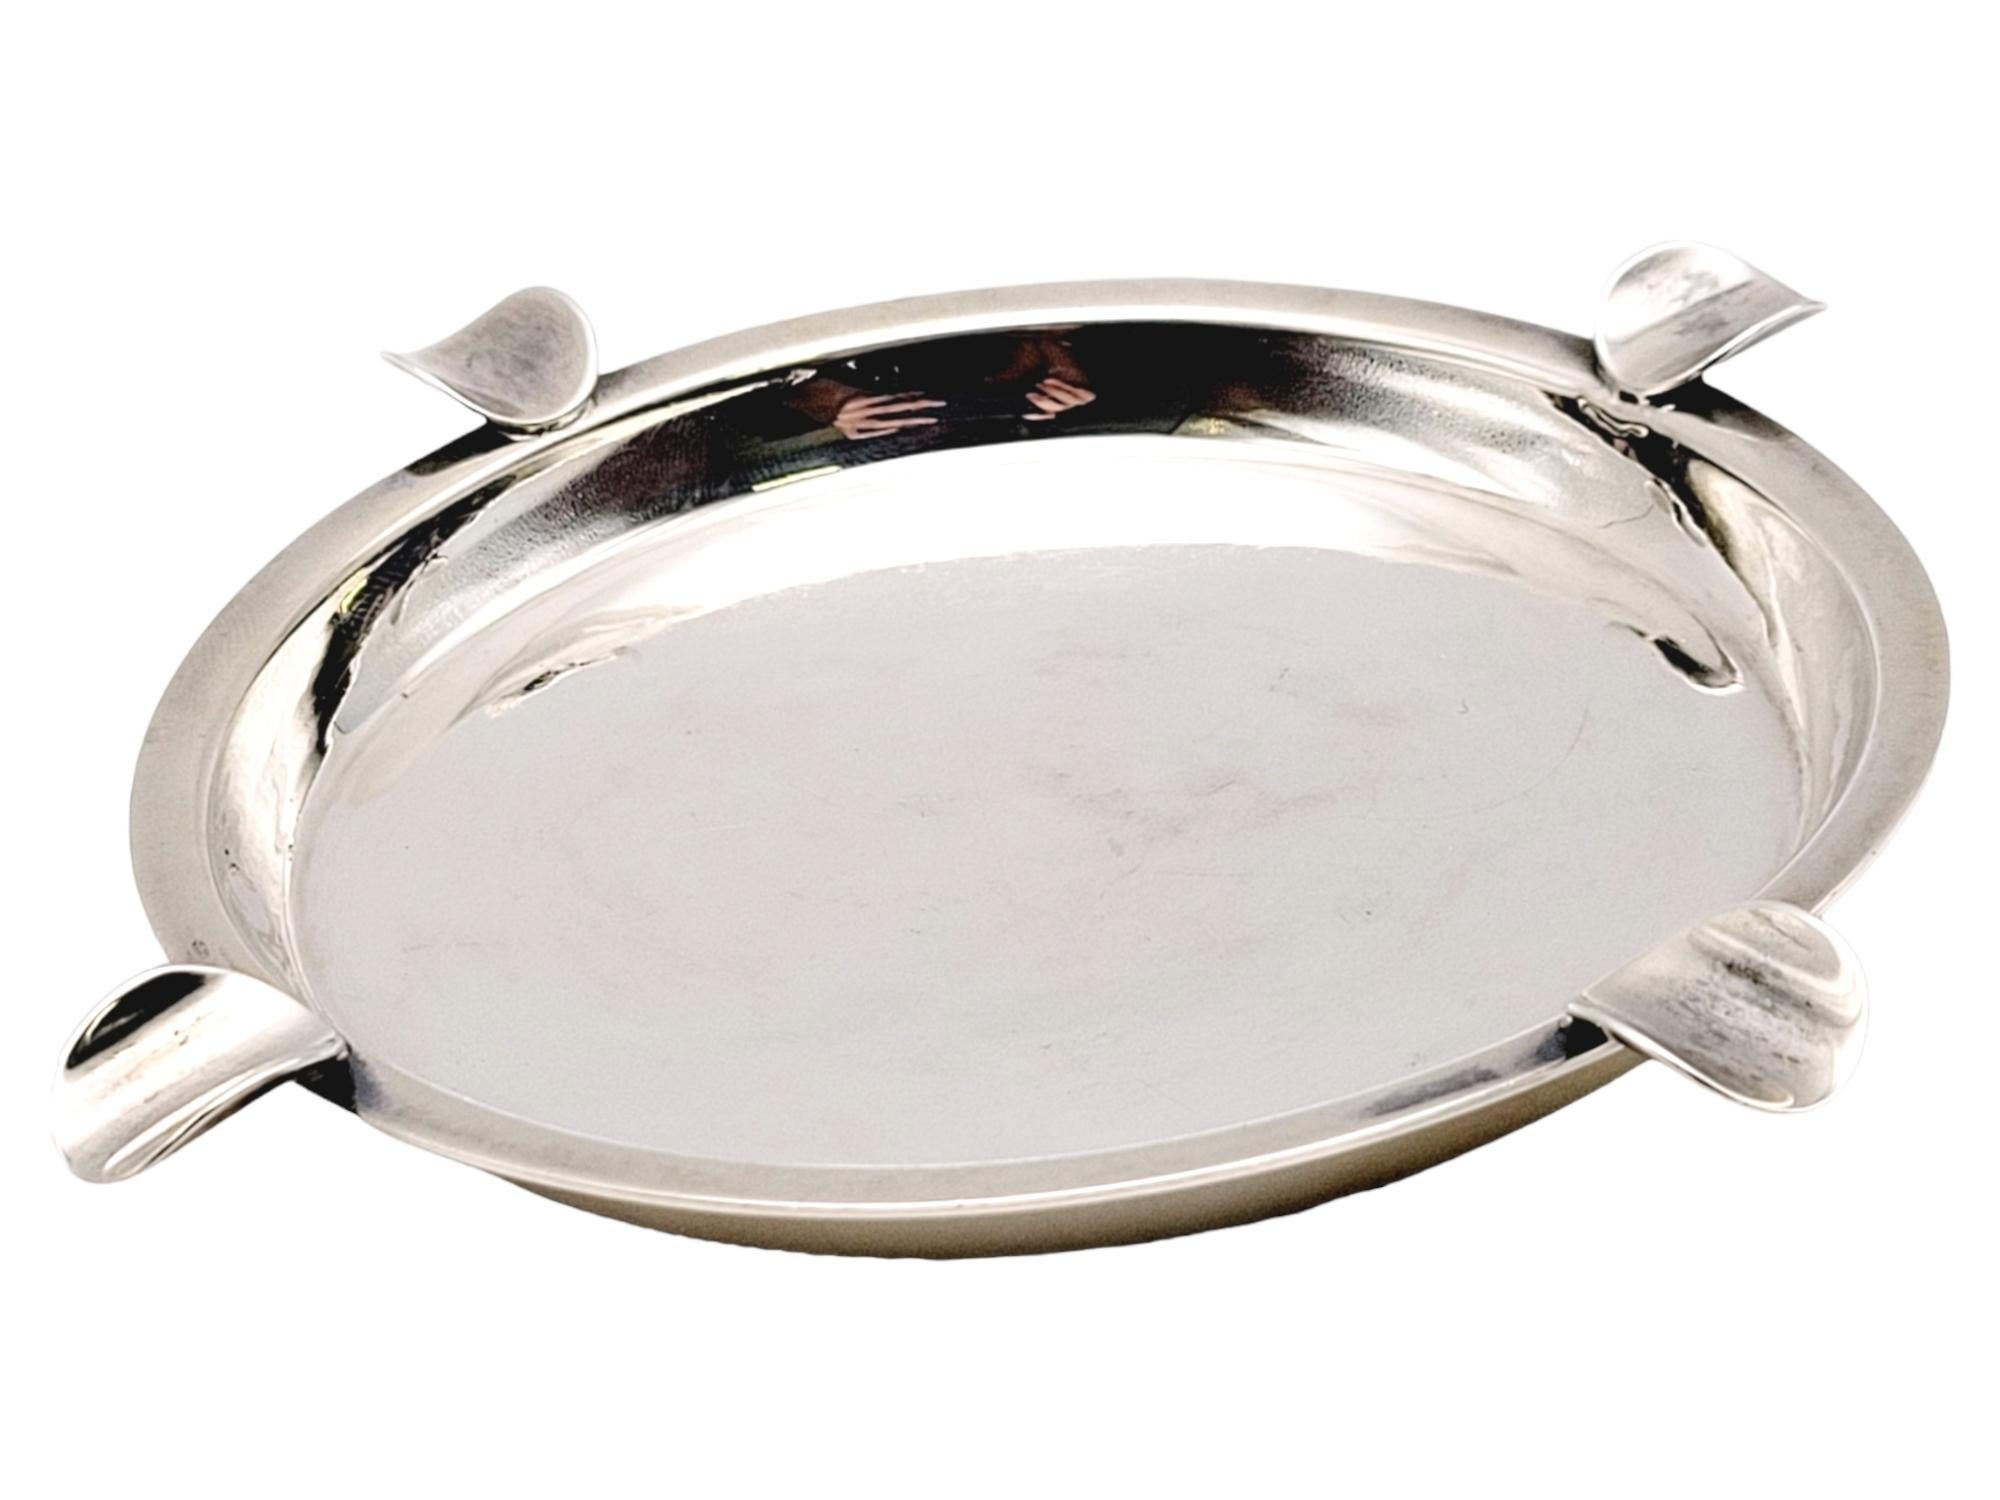 Carl Poul Petersen Polished Modern Ashtray in Sterling Silver, circa 1940-1970 In Good Condition For Sale In Scottsdale, AZ